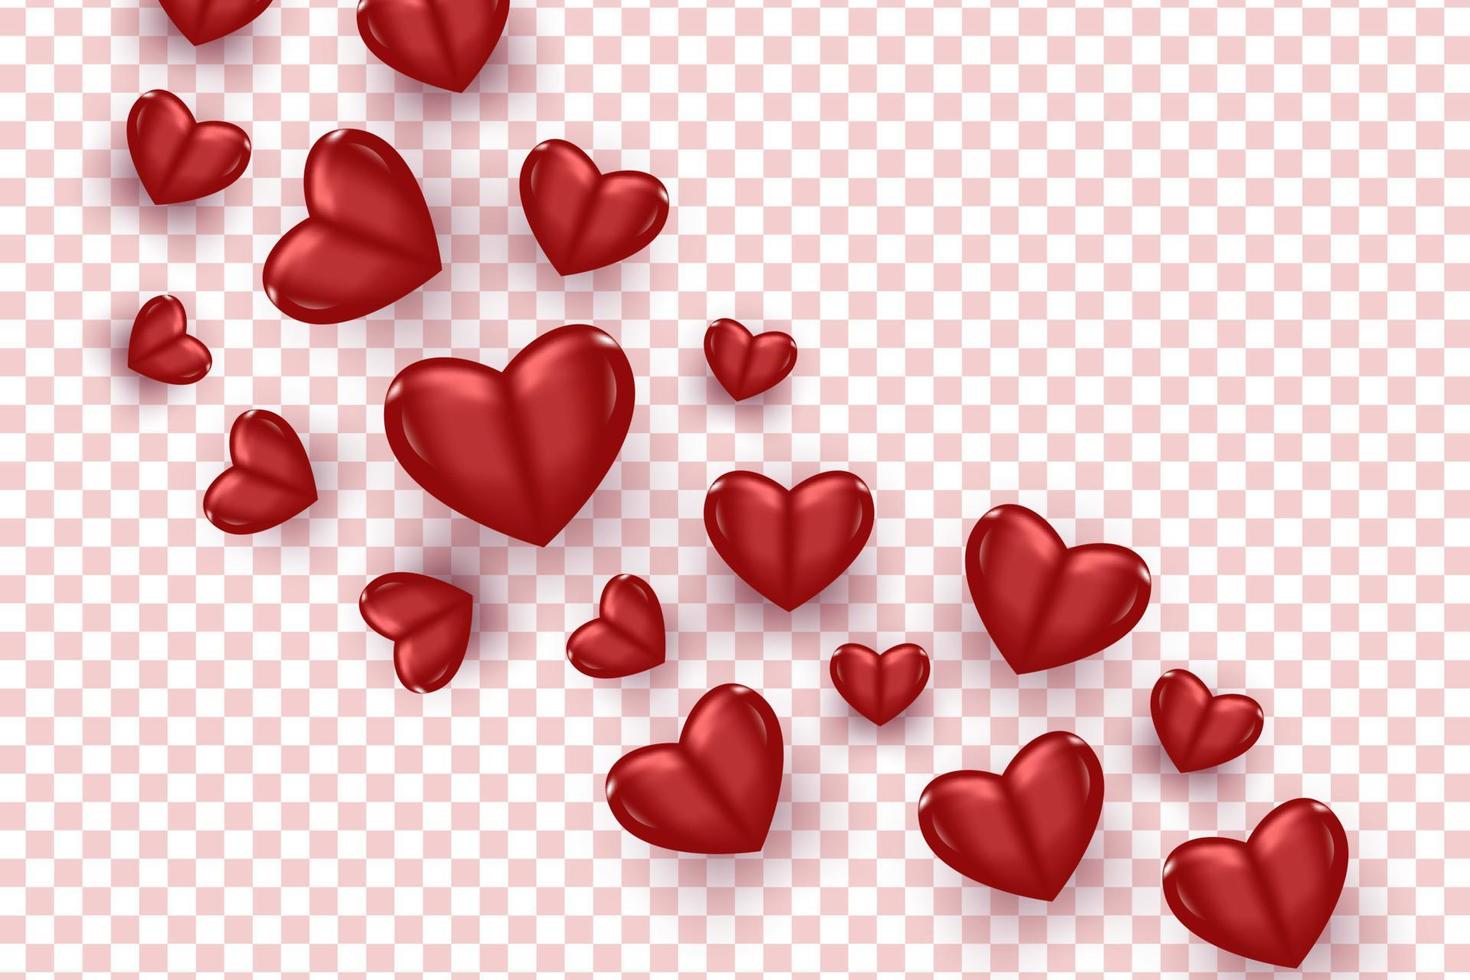 3D Red Flying Hearts Isolated on Transparent Background vector